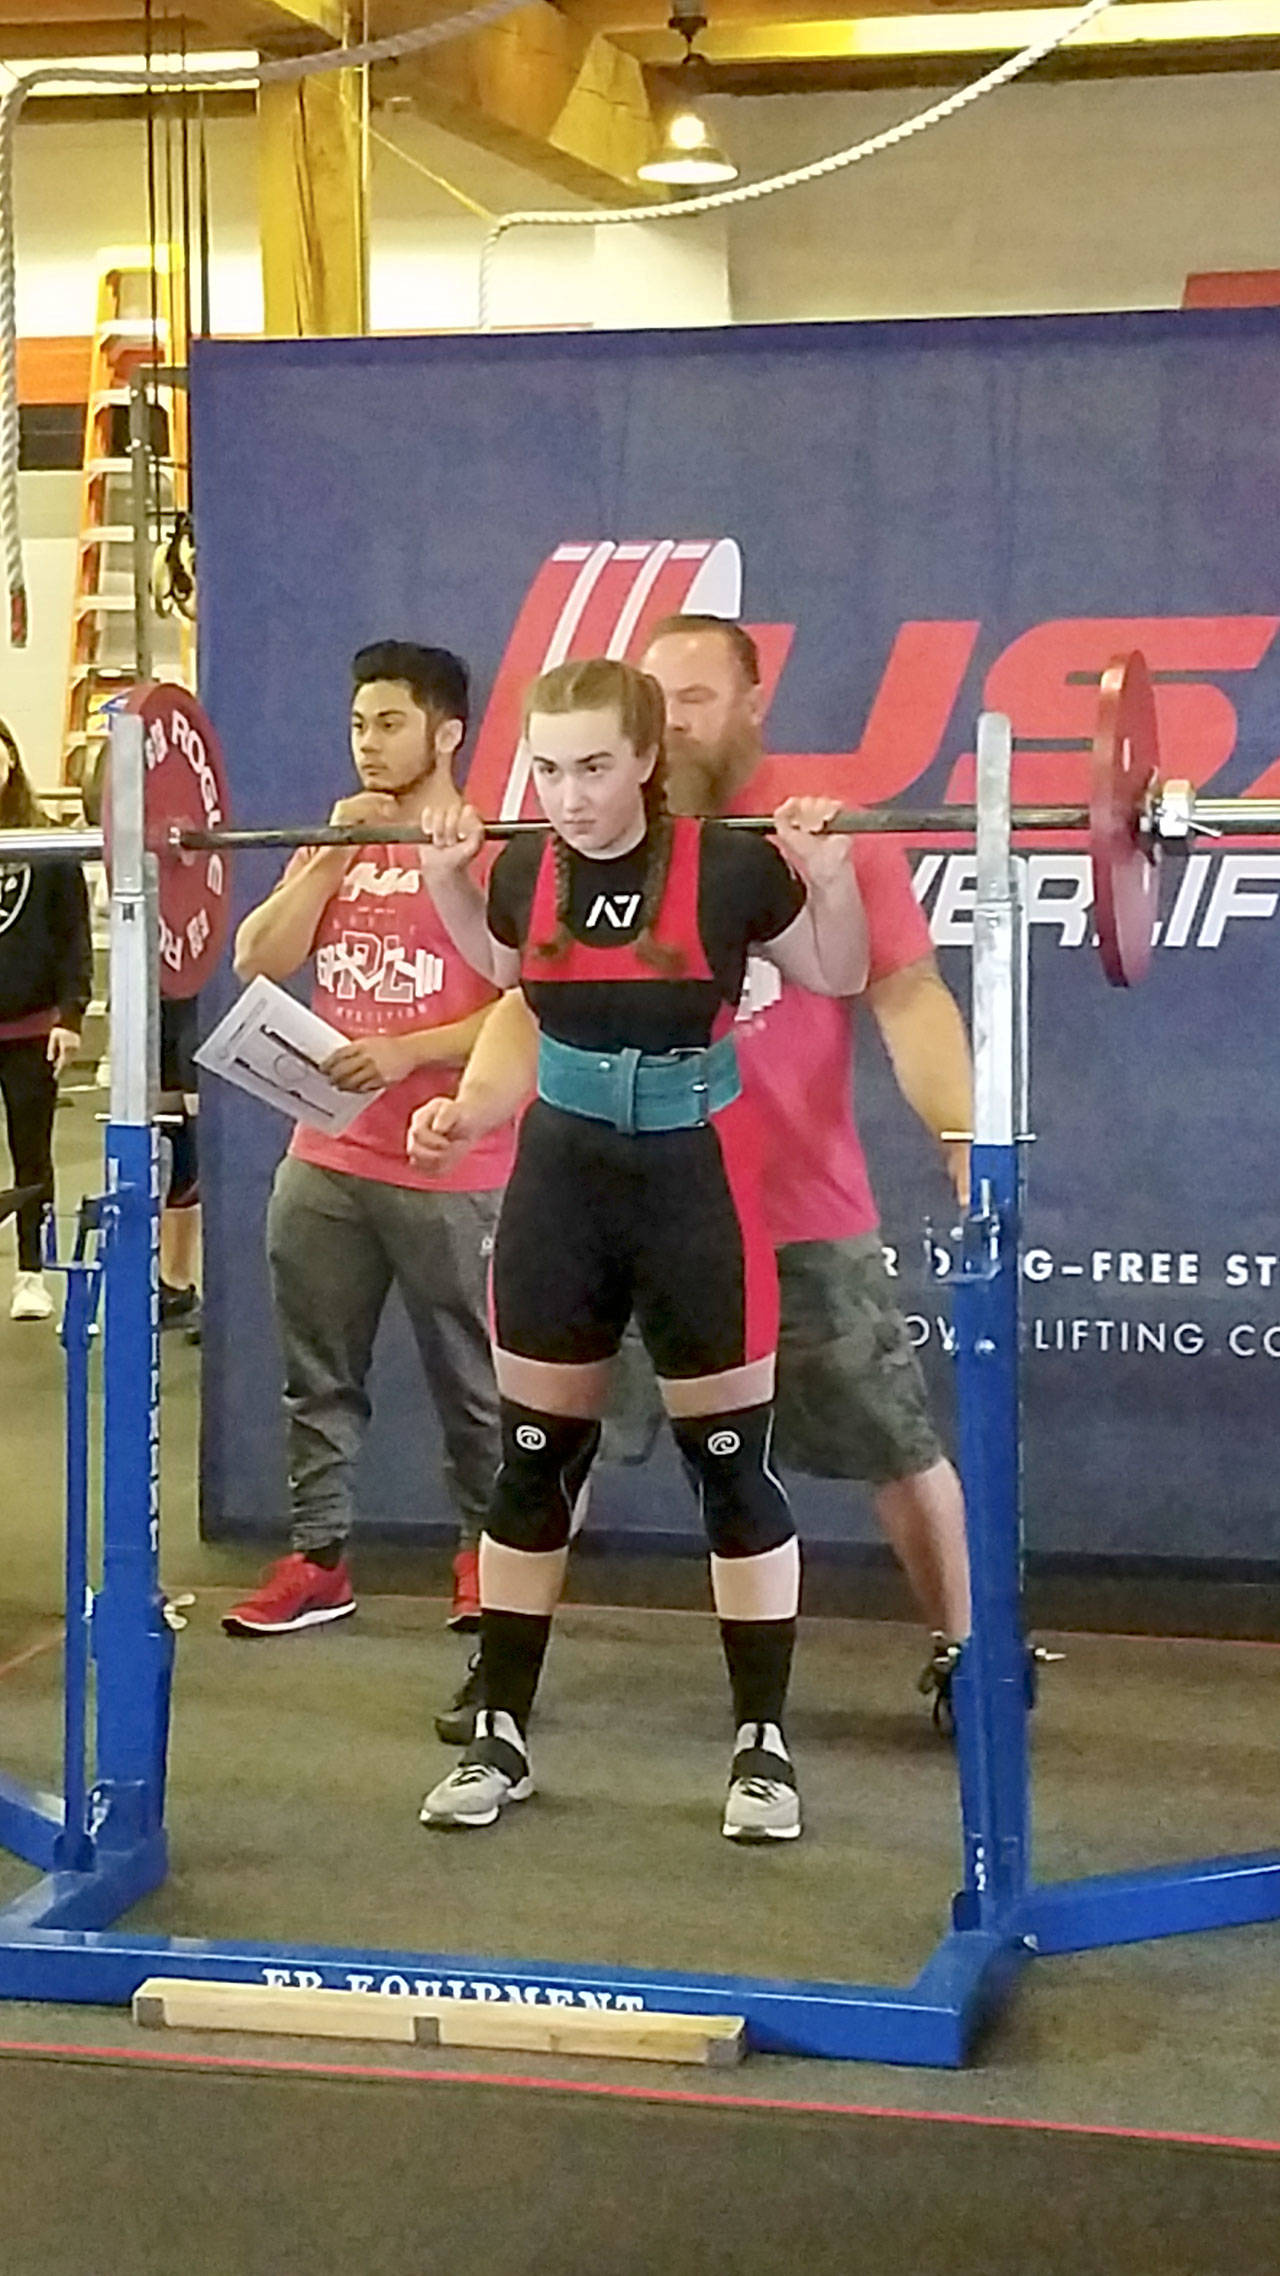 Eighth-grader Jillian Whiting competes in the 2018 USA Powerlifting Rookie Competition at Tacoma Strength in January. She set a state record in the deadlift for the Teen 1 division for 14- and 15-year-old girls with a 259-pound lift. Courtesy Traci Whiting